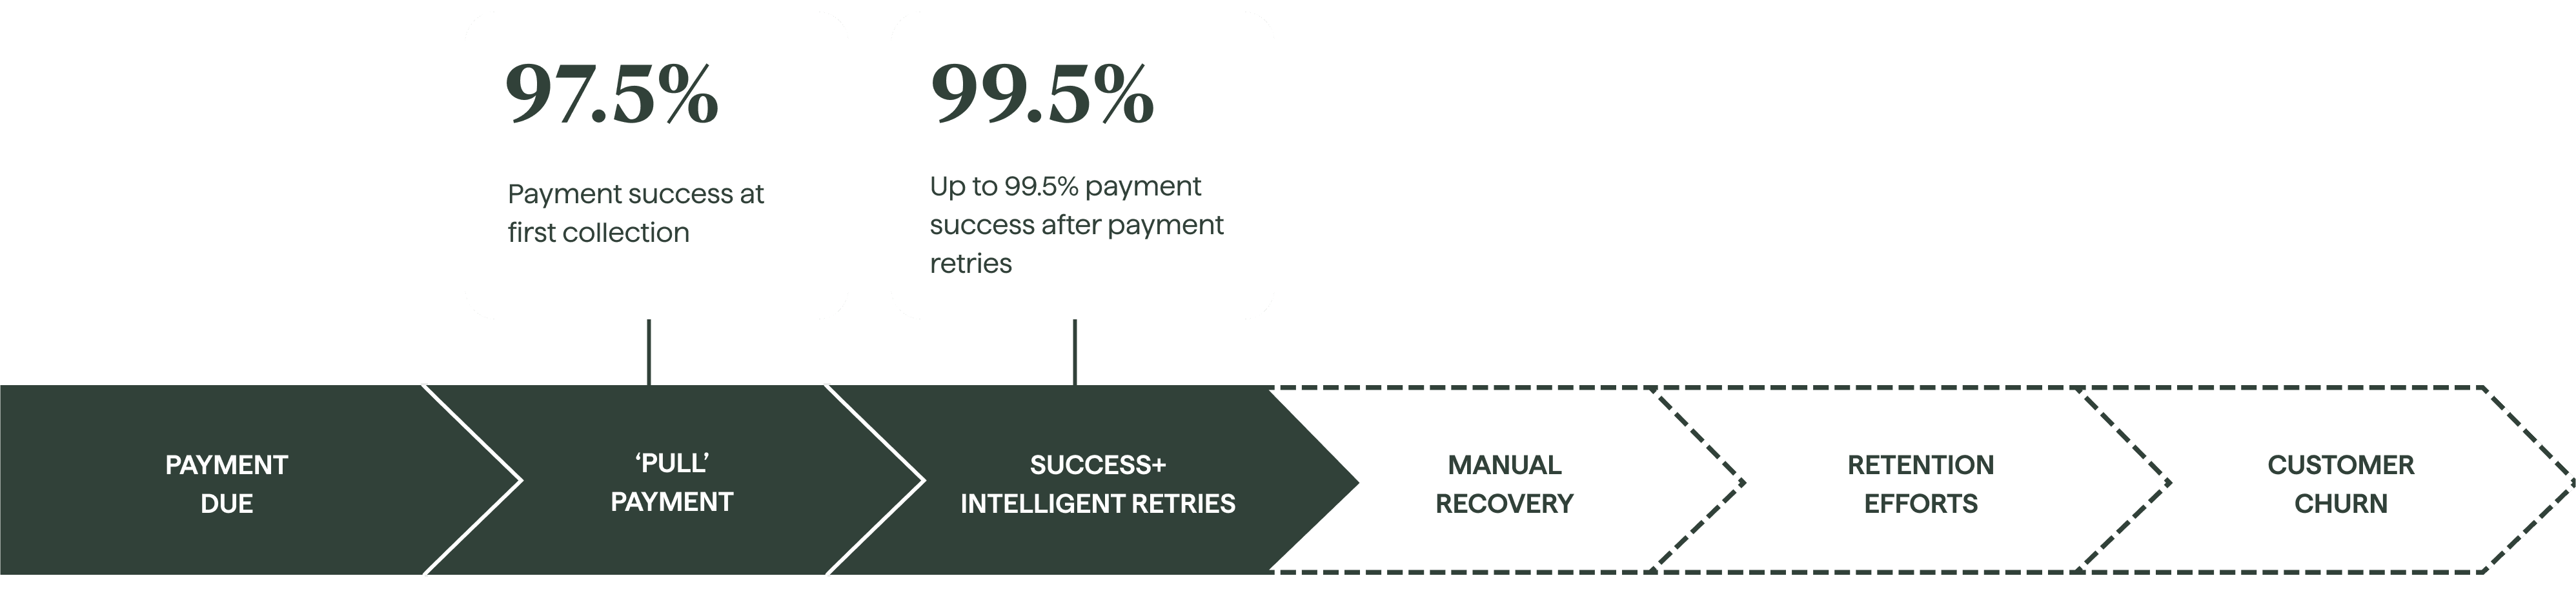 Payment failure rates as low as 0.5%